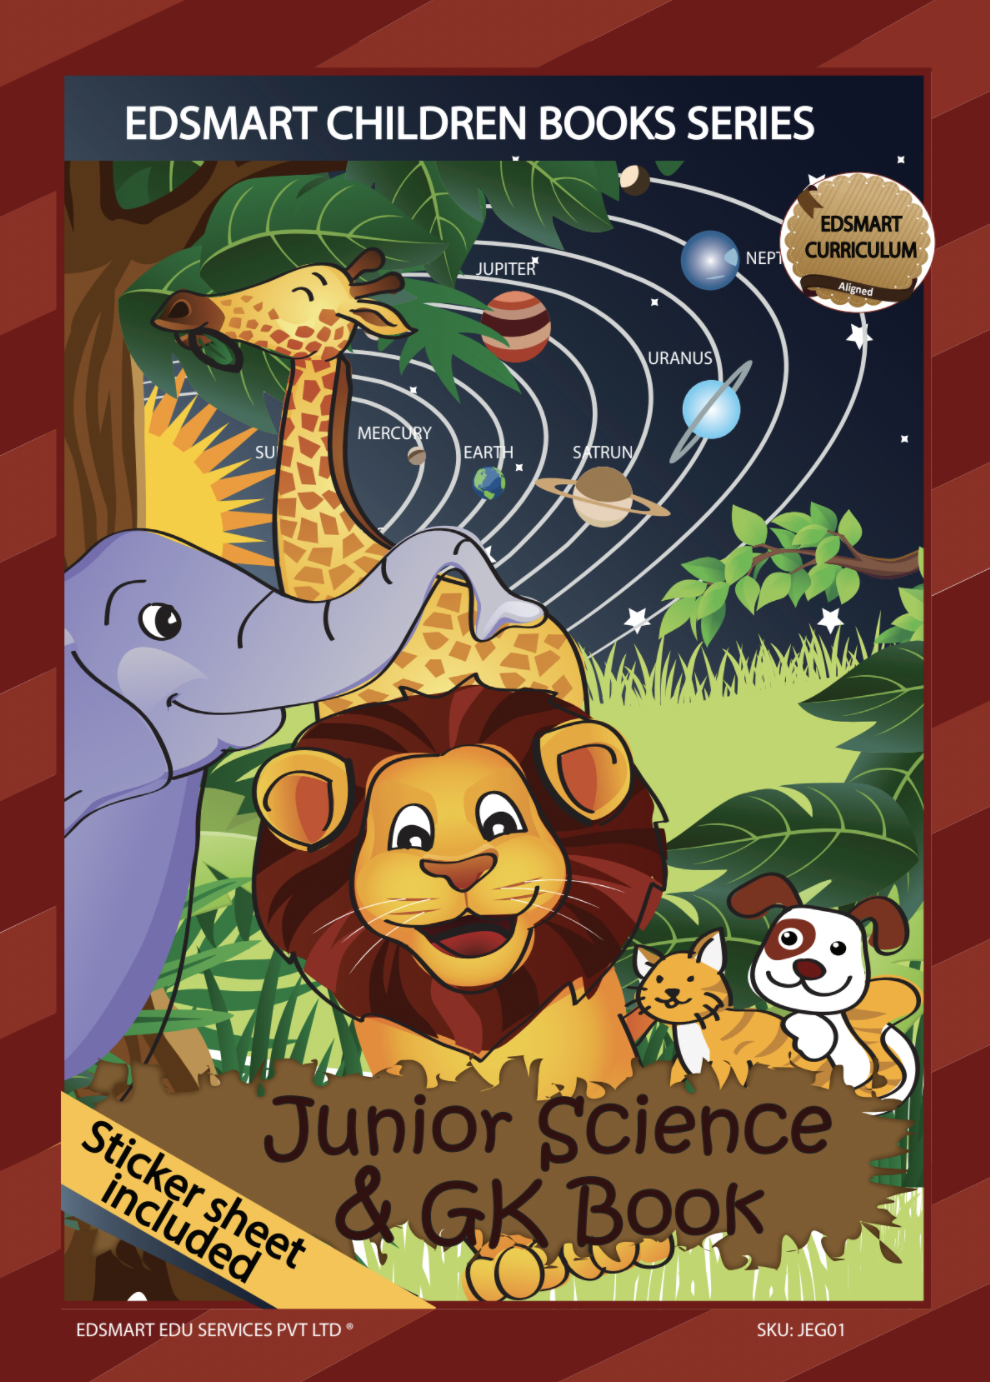 Junior KG Science Book for 4+ years ( sticker sheet included)